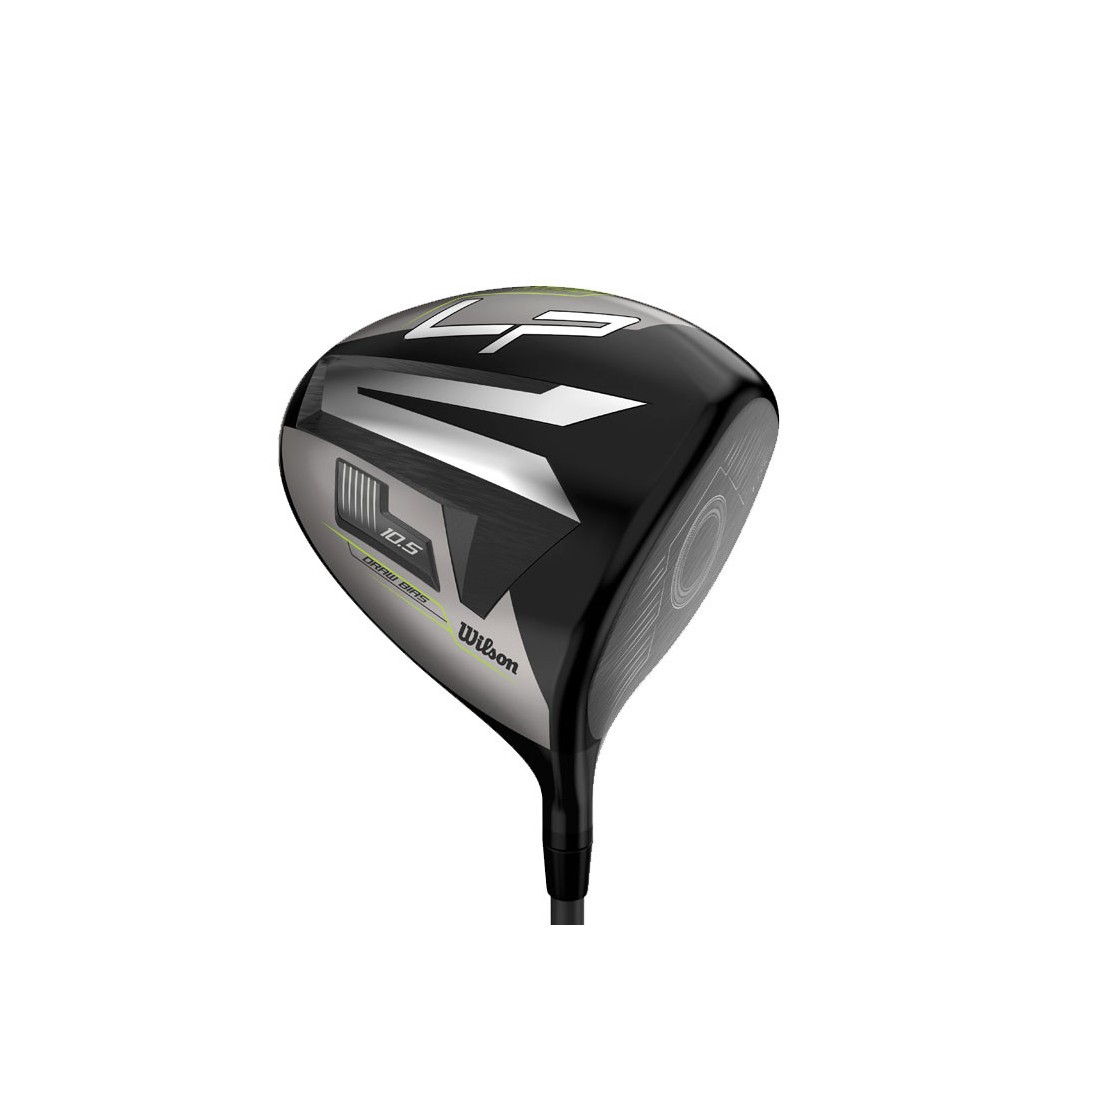 Wilson driver Launch Pad 2 lady